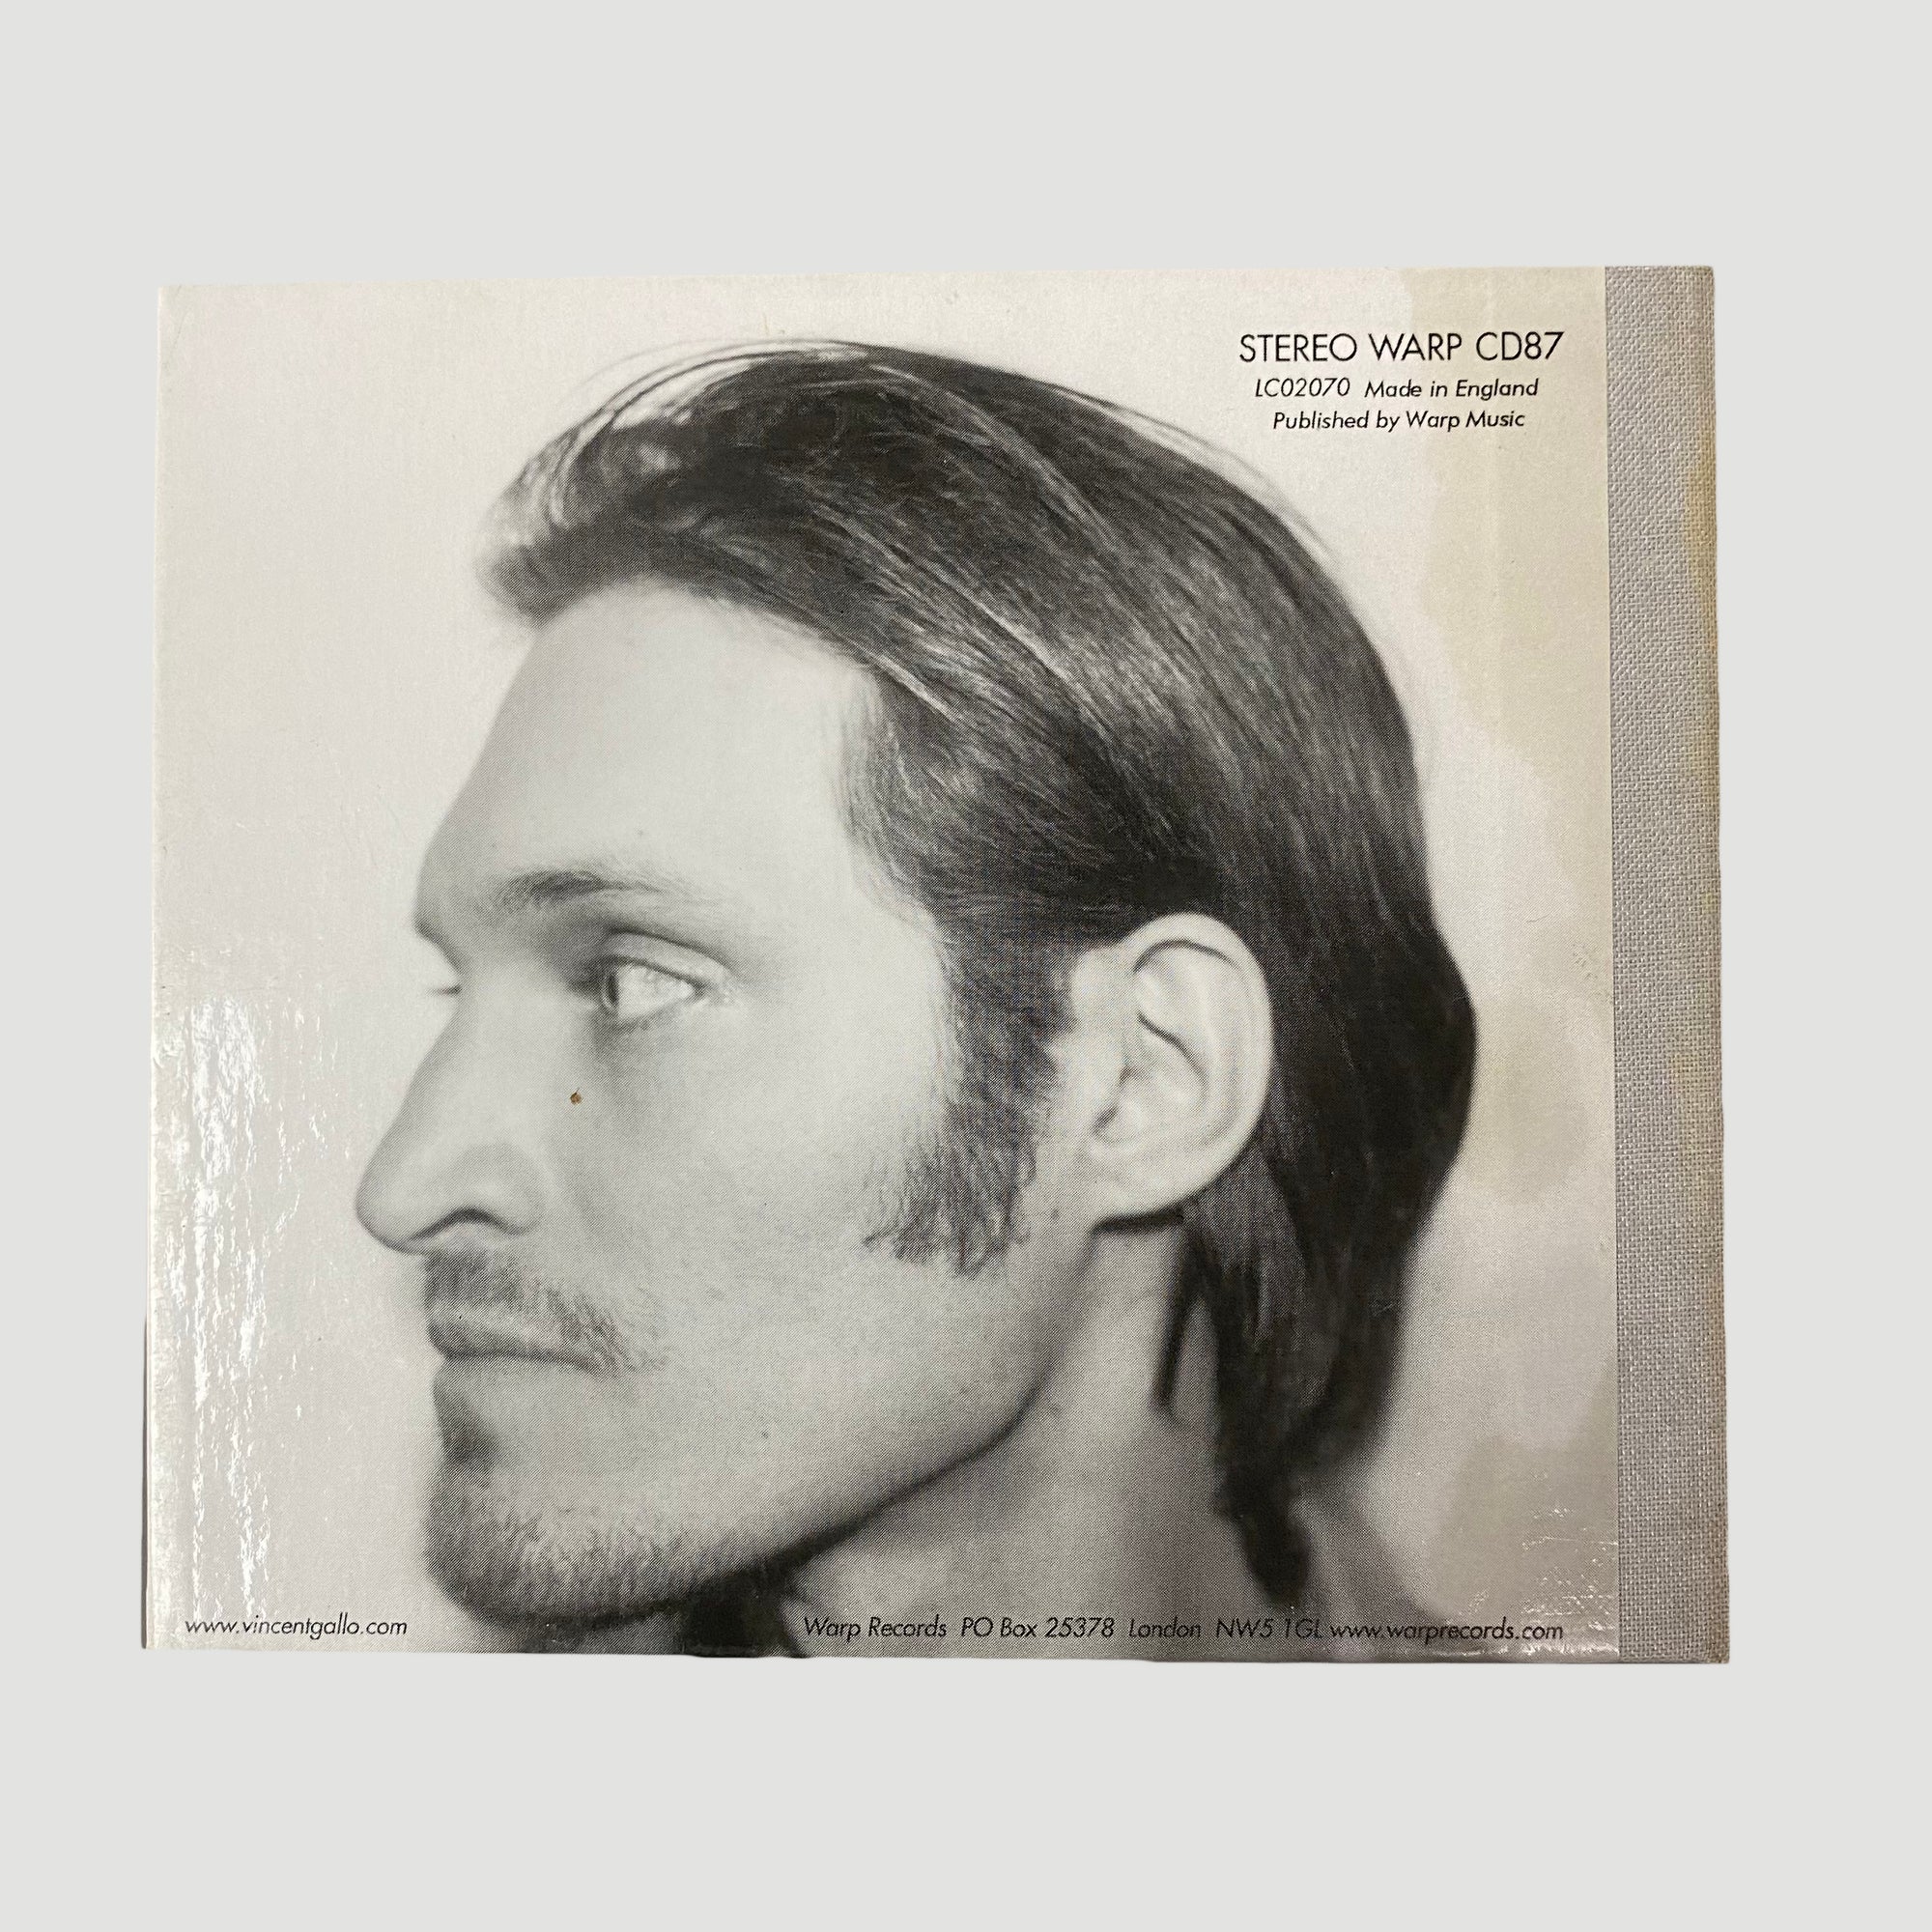 2001 Vincent Gallo 'When' CD (Limited Edition)